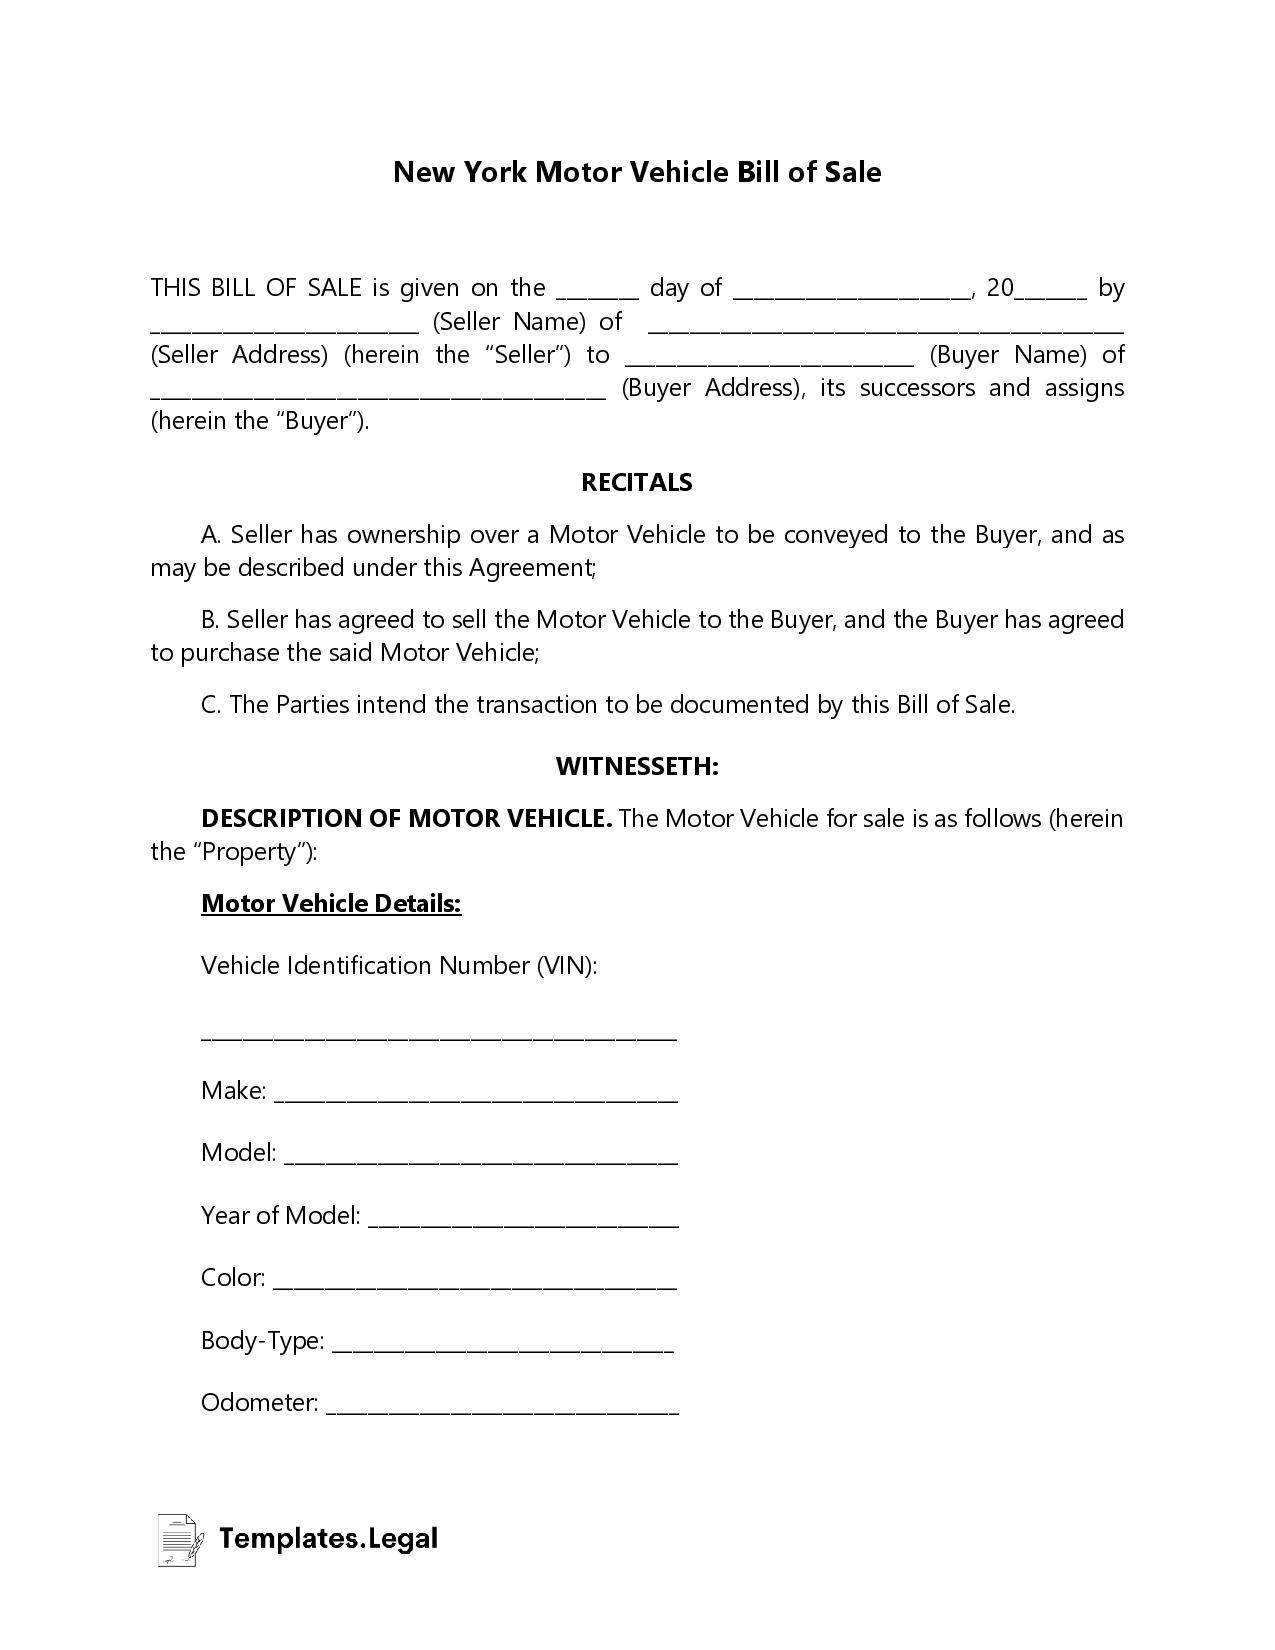 New York Motor Vehicle Bill of Sale - Templates.Legal